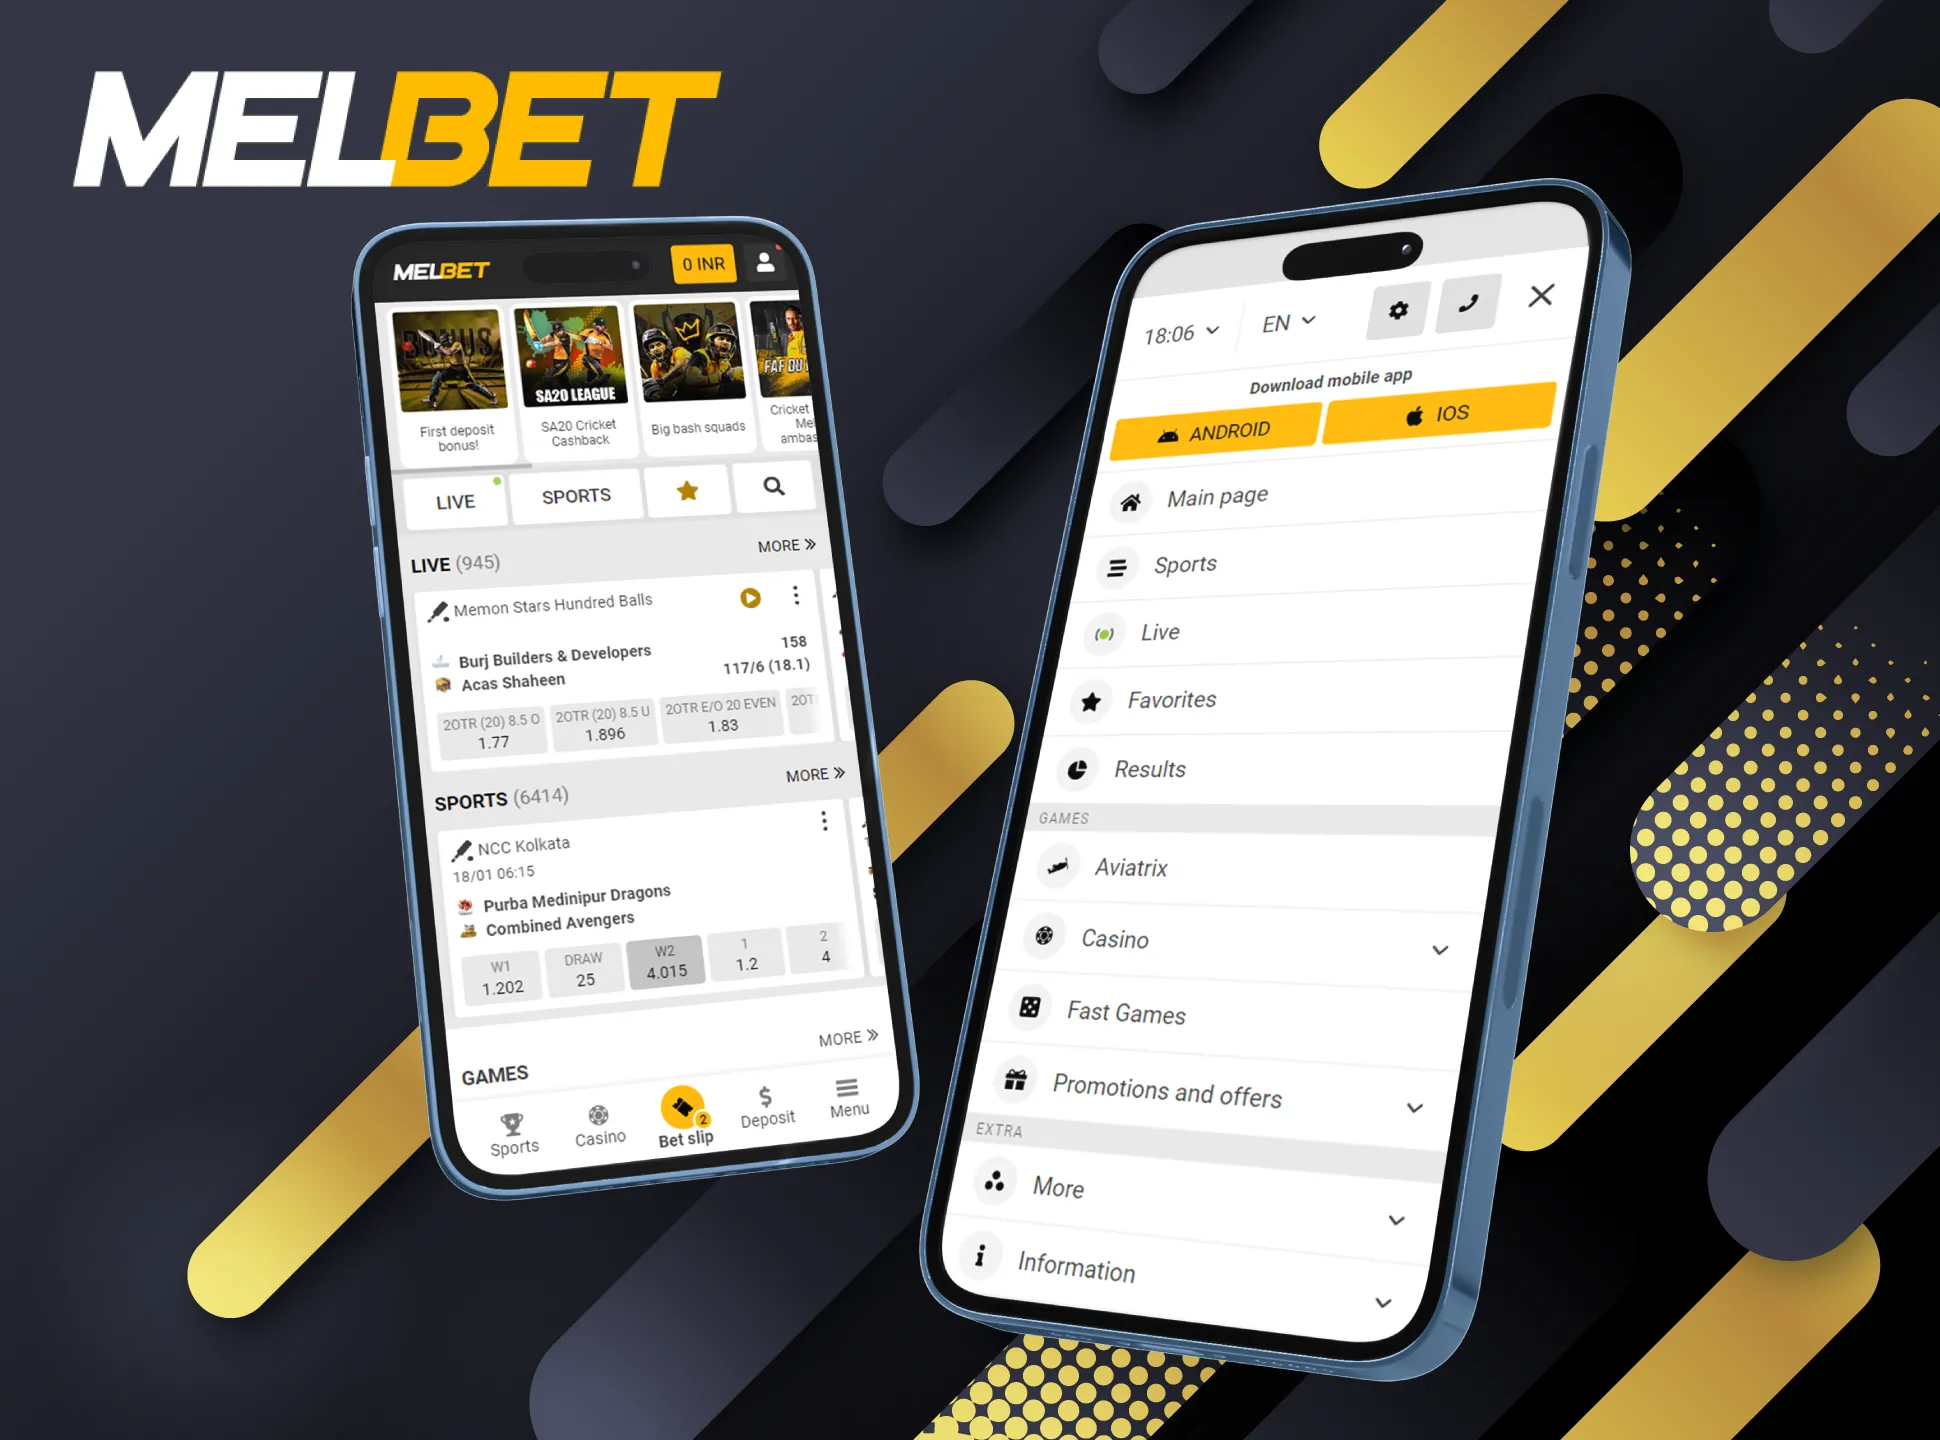 Install the Melbet app and dive into the fascinating world of betting and casino gaming.